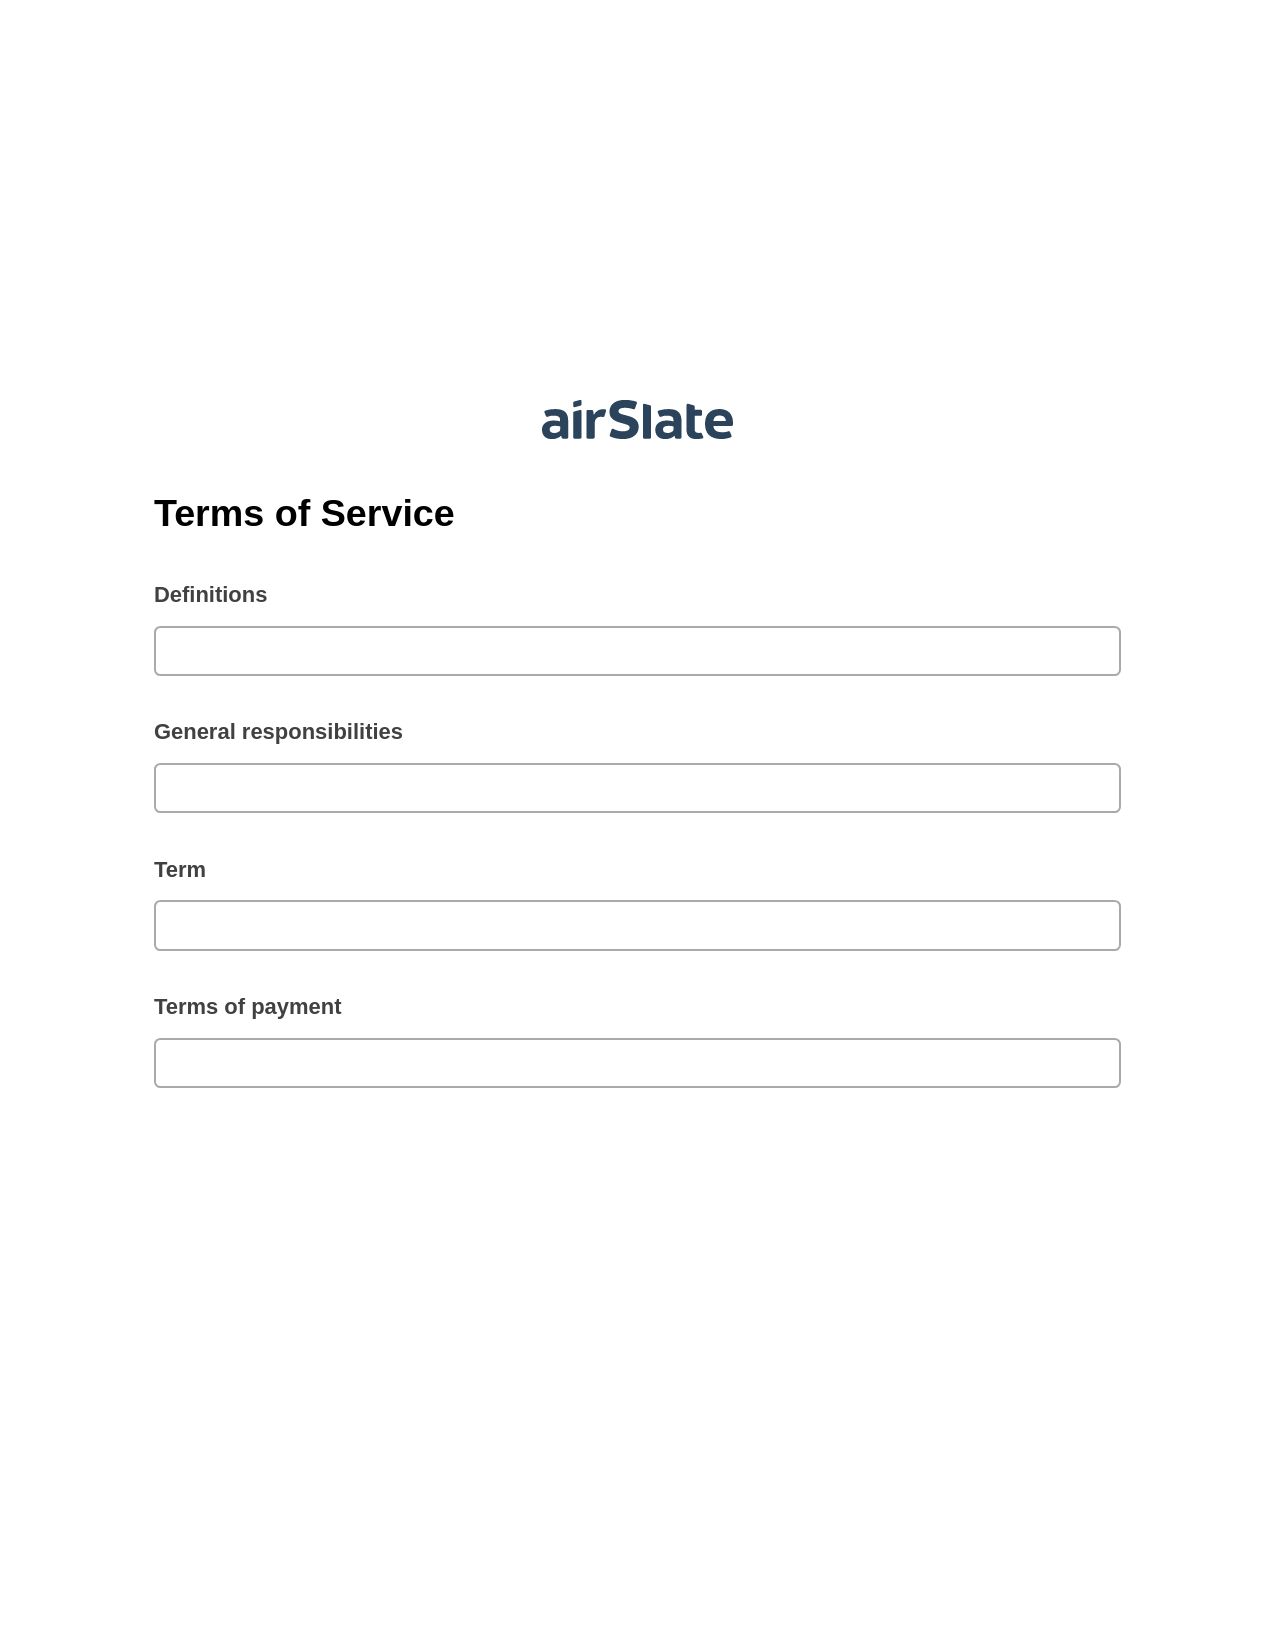 Terms of Service Pre-fill Slate from MS Dynamics 365 Records Bot, Slack Notification Bot, Box Bot